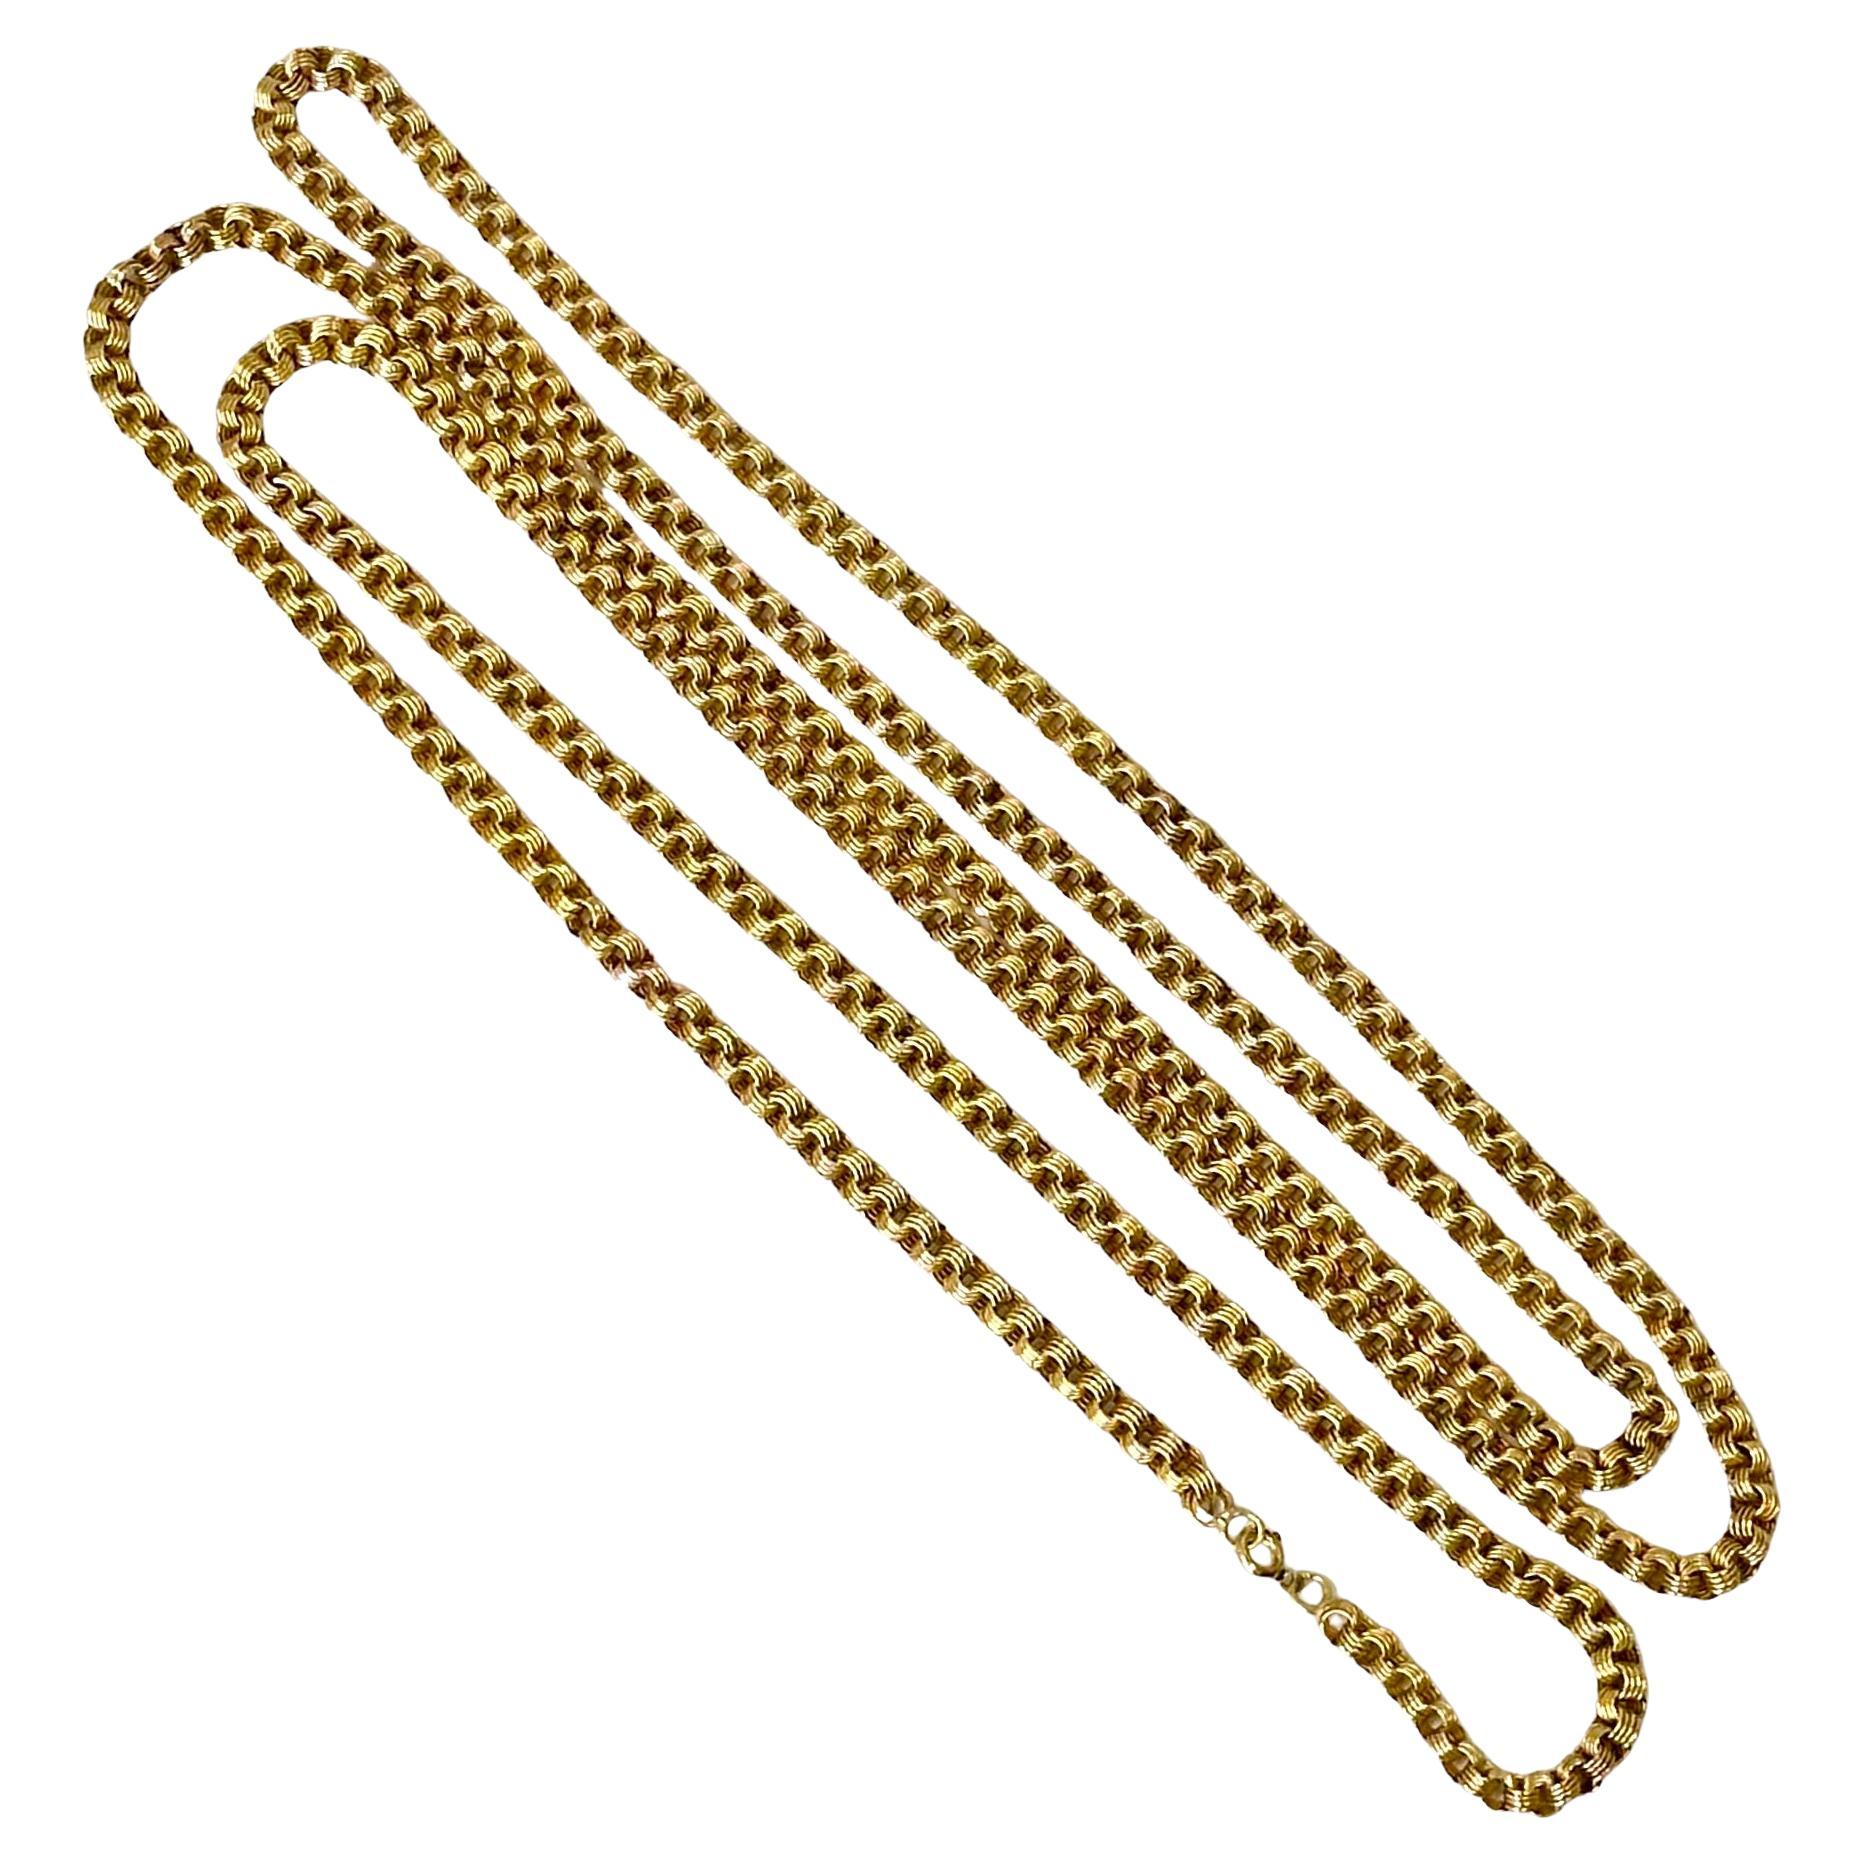 With a length of 58 inches, this expertly crafted early 20th century 14k yellow gold link neck chain lends itself to being worn in a number of different configurations; in one long, continuous length, doubled up, or even tripled up around the neck.